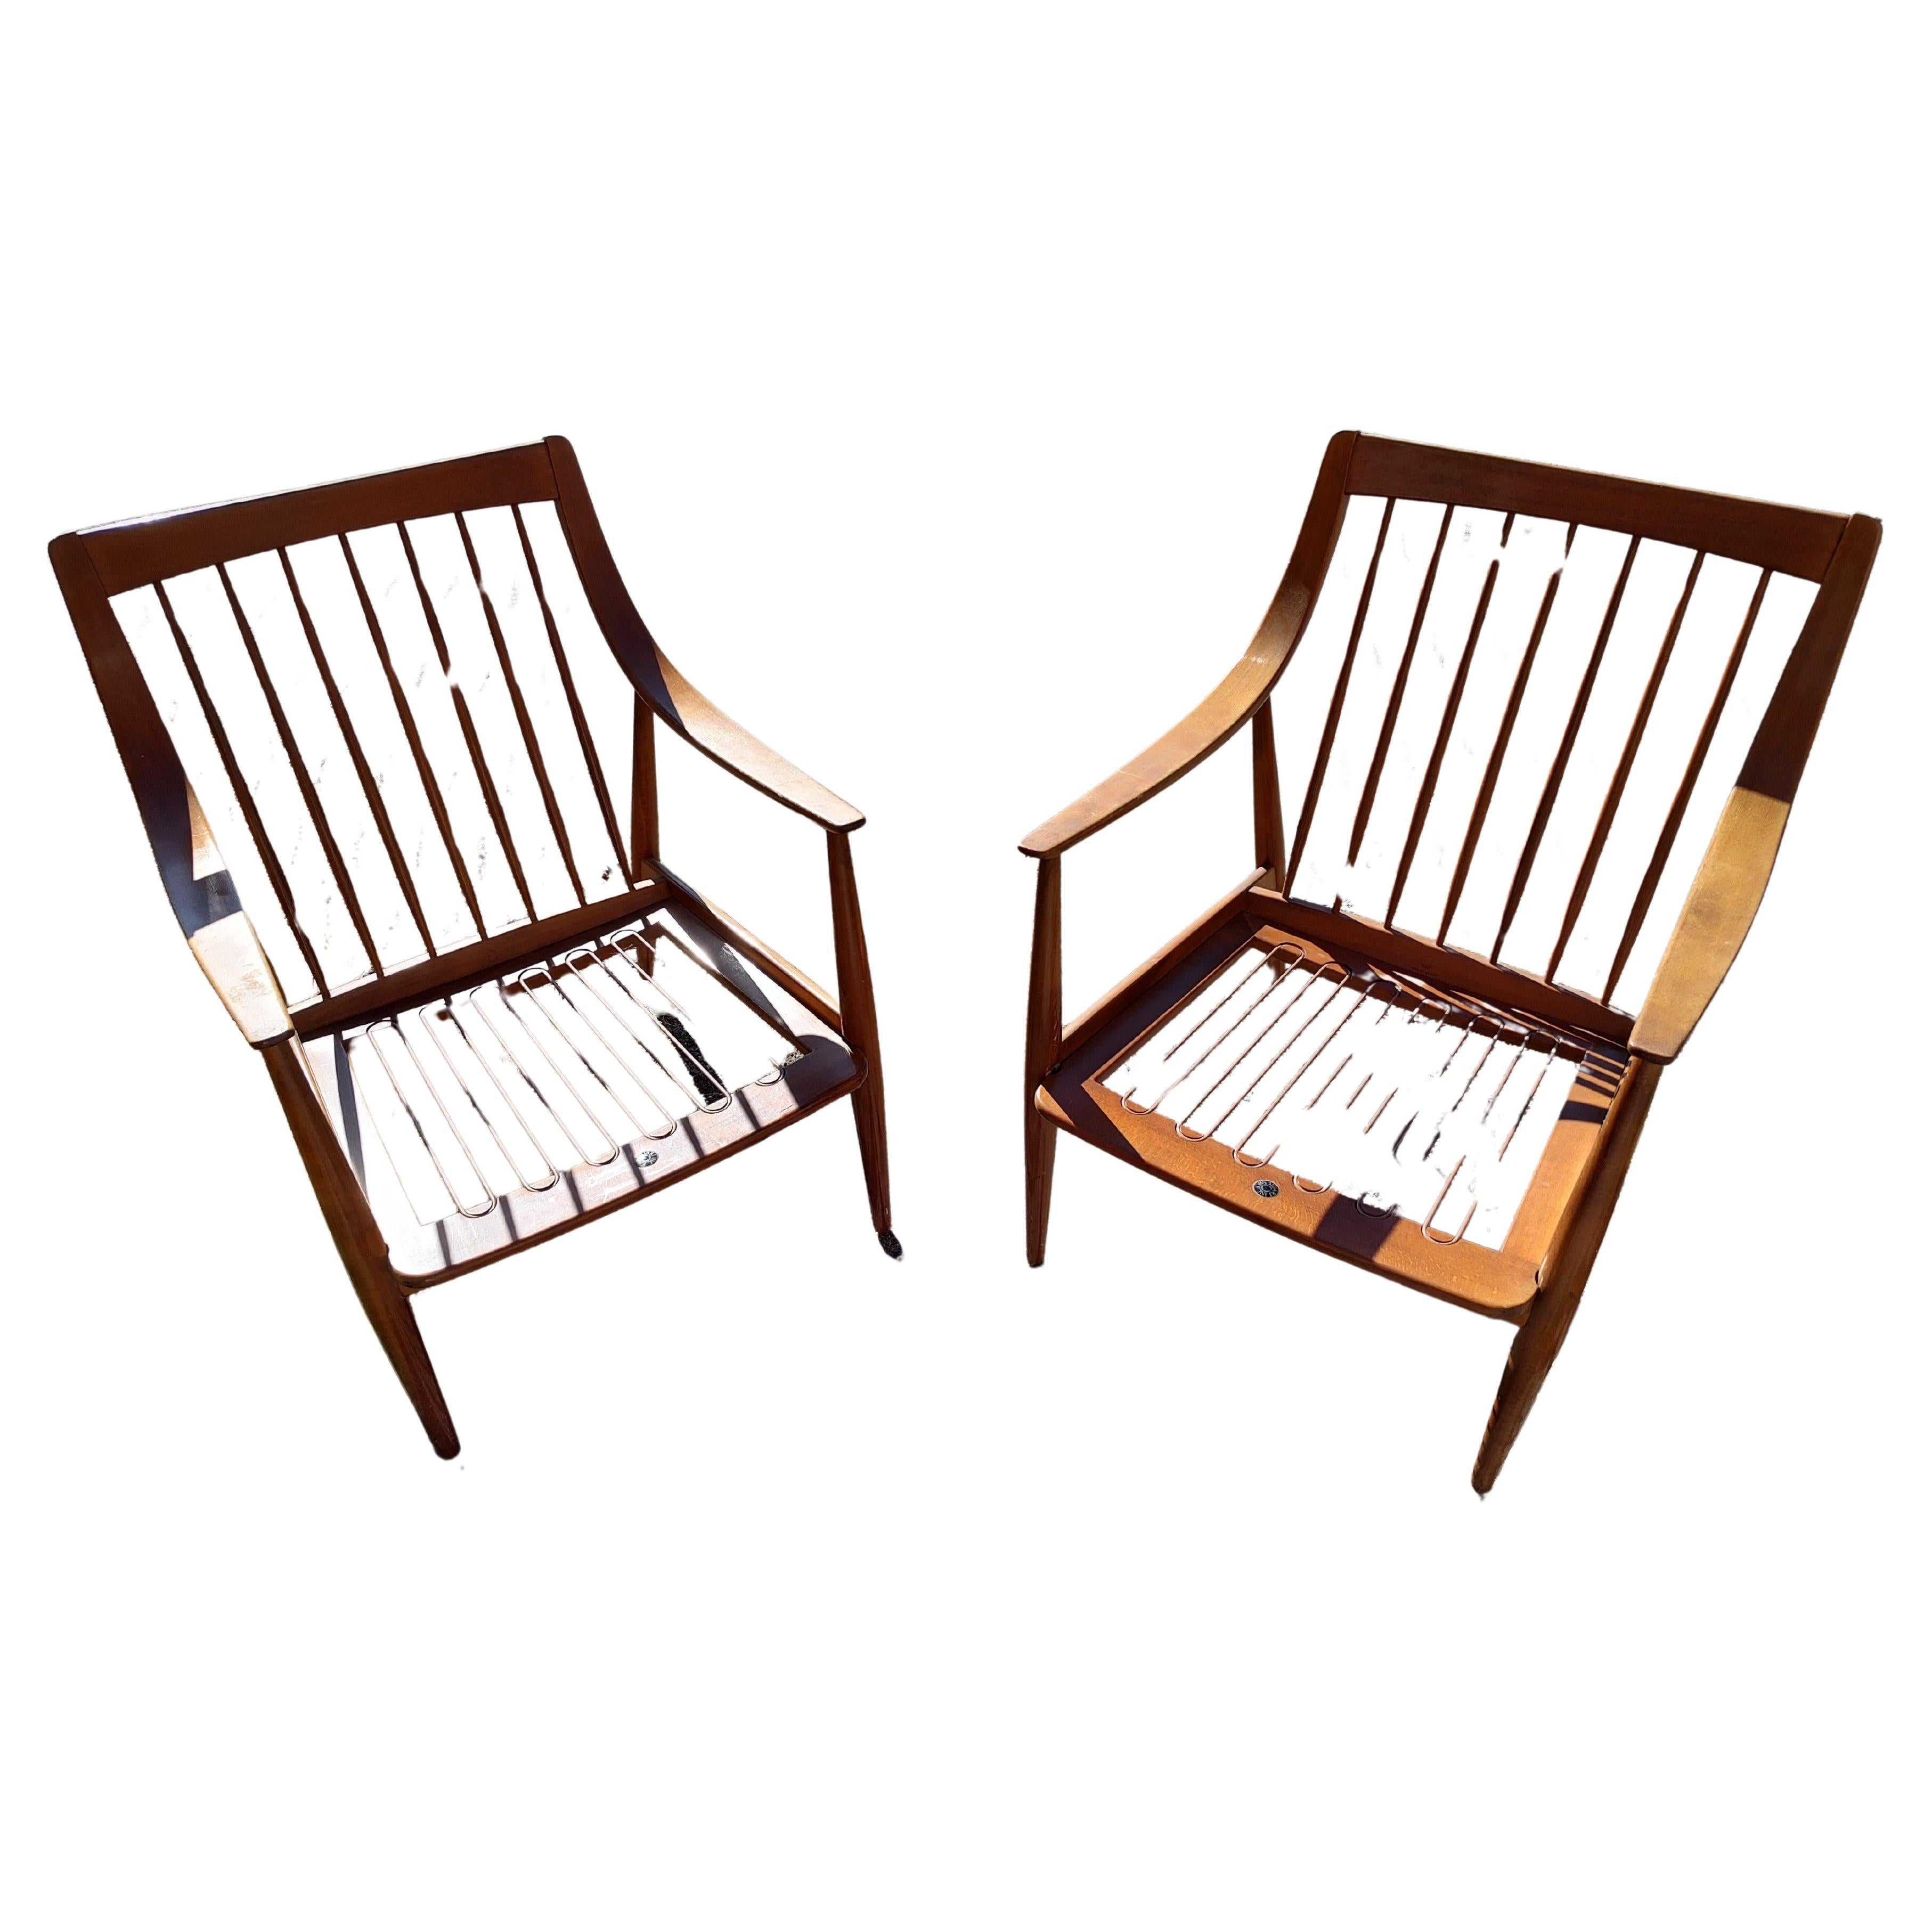 Mid-20th Century Pair of Mid-Century Modern Lounge Chairs by Peter Hvidt & Olga Molgaard Neilson  For Sale